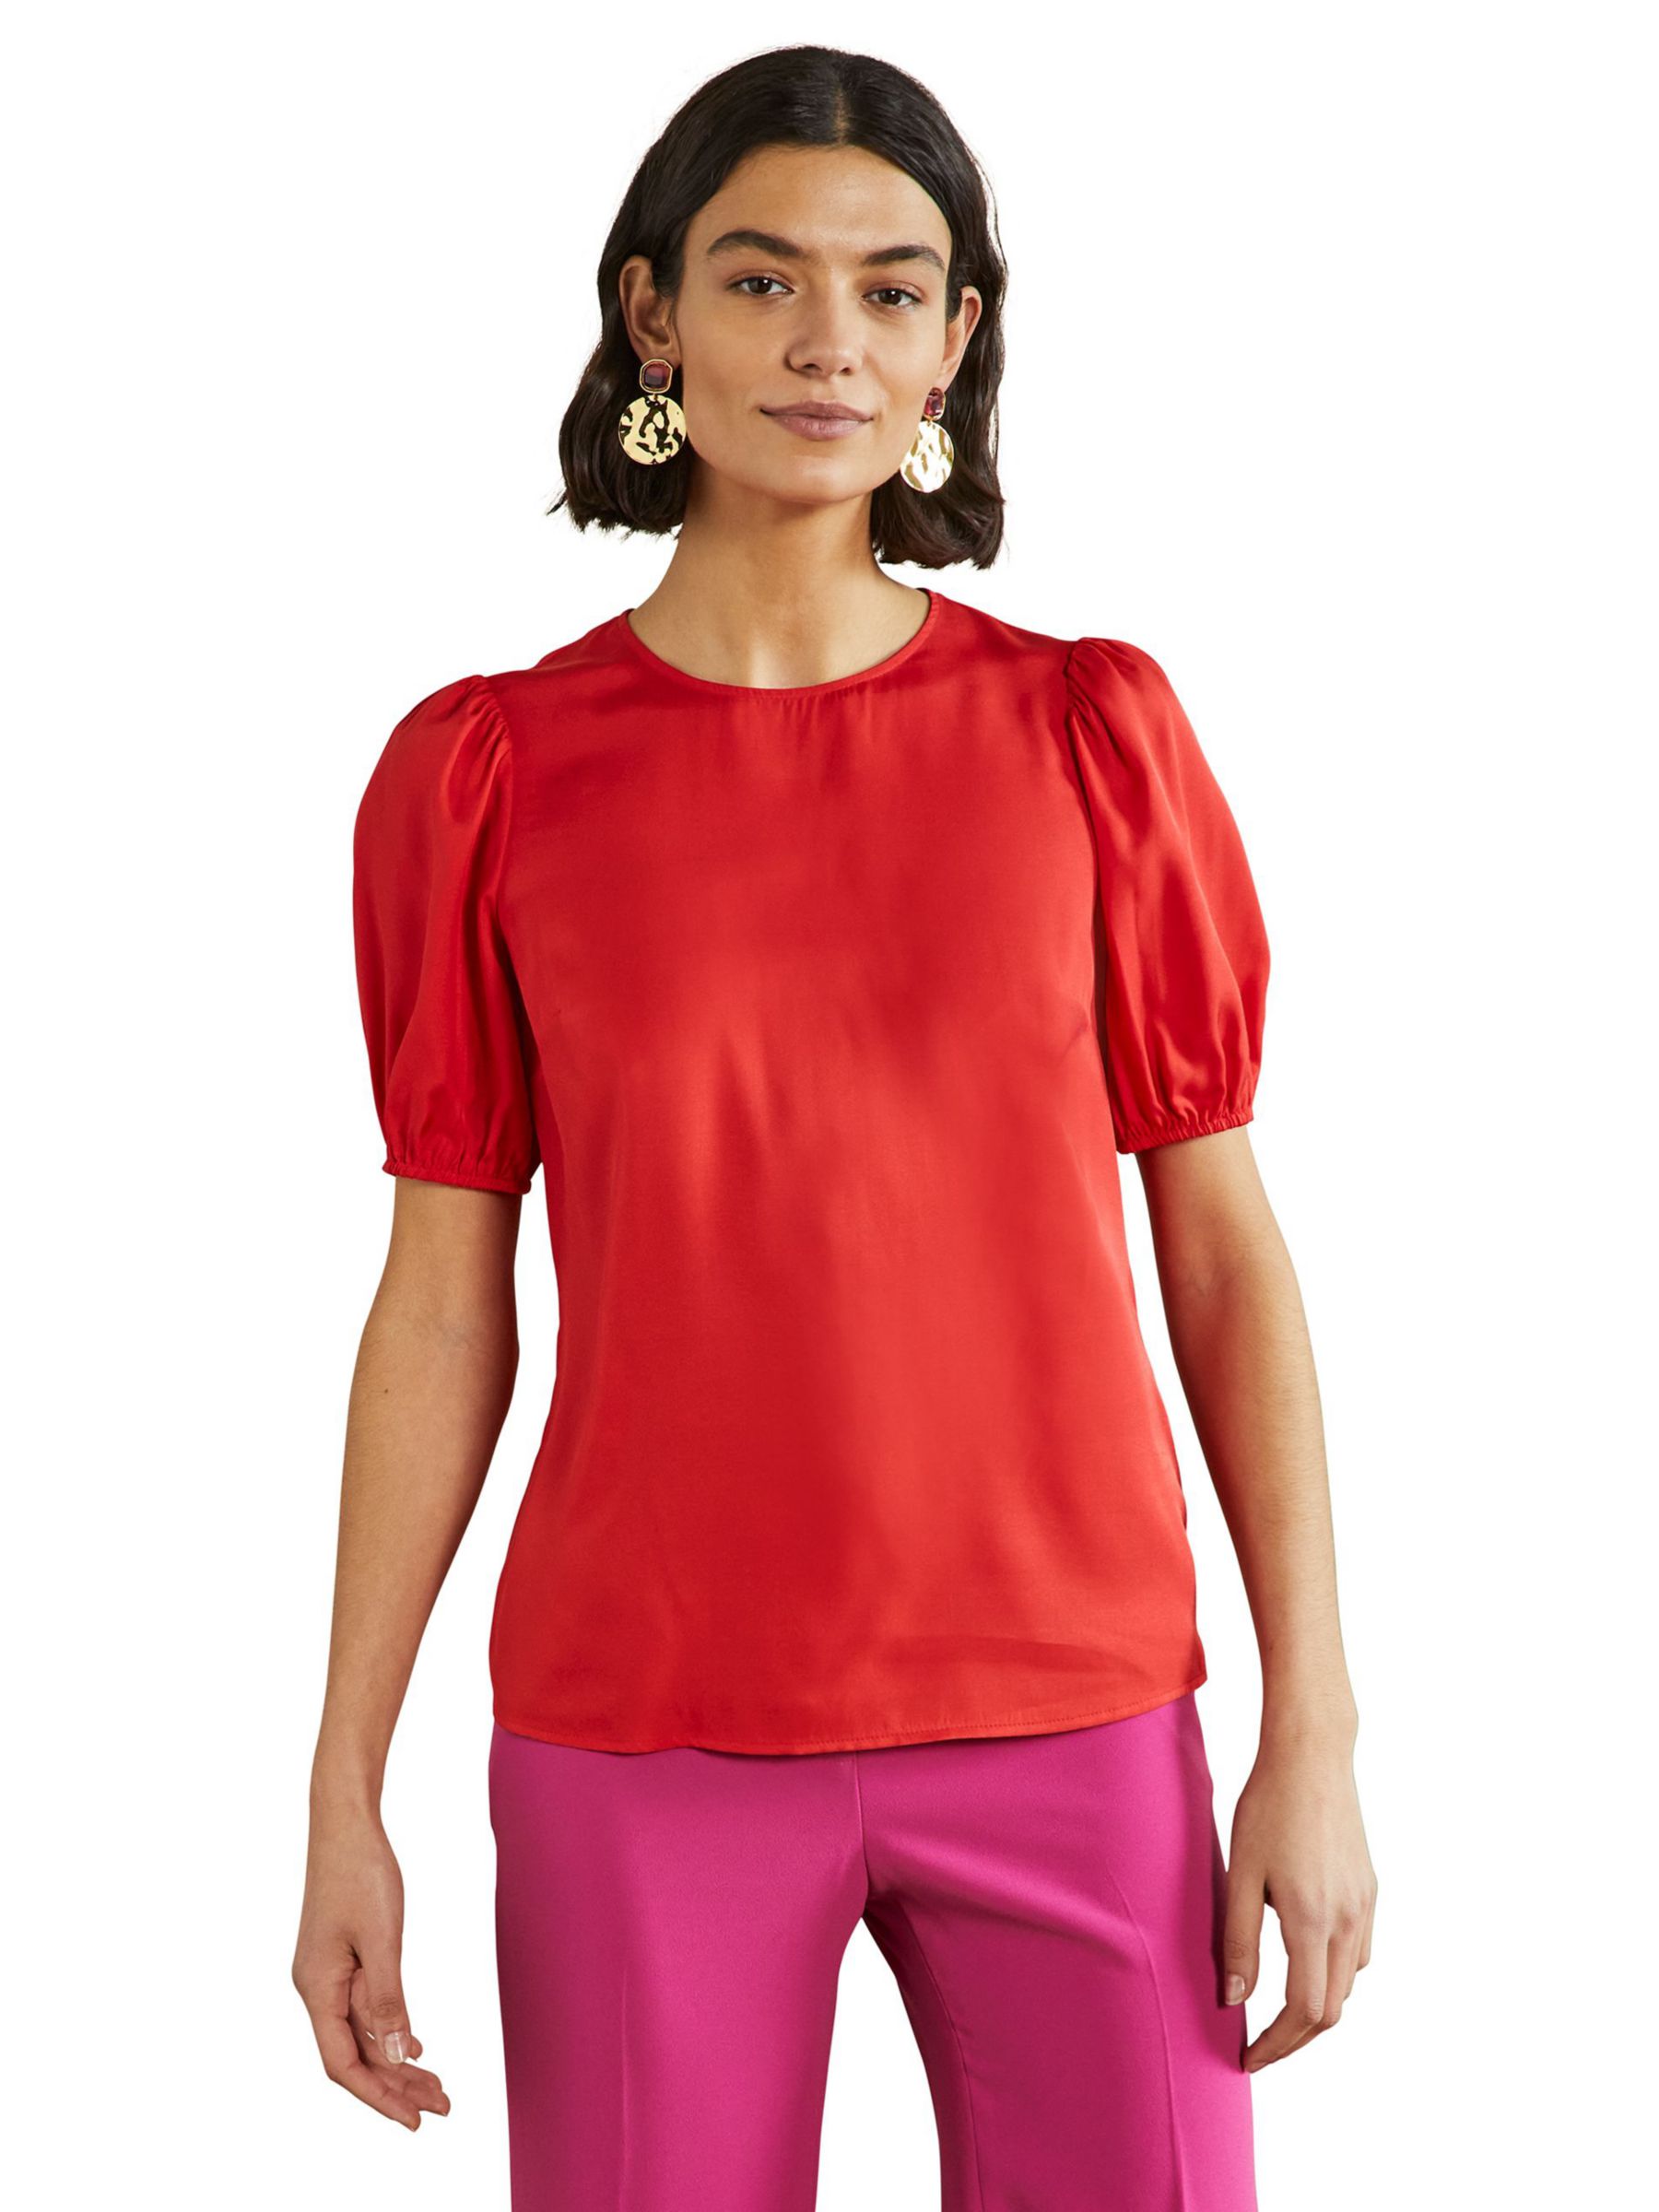 Boden Adriana Puff Sleeve Top, Fire Red, 8